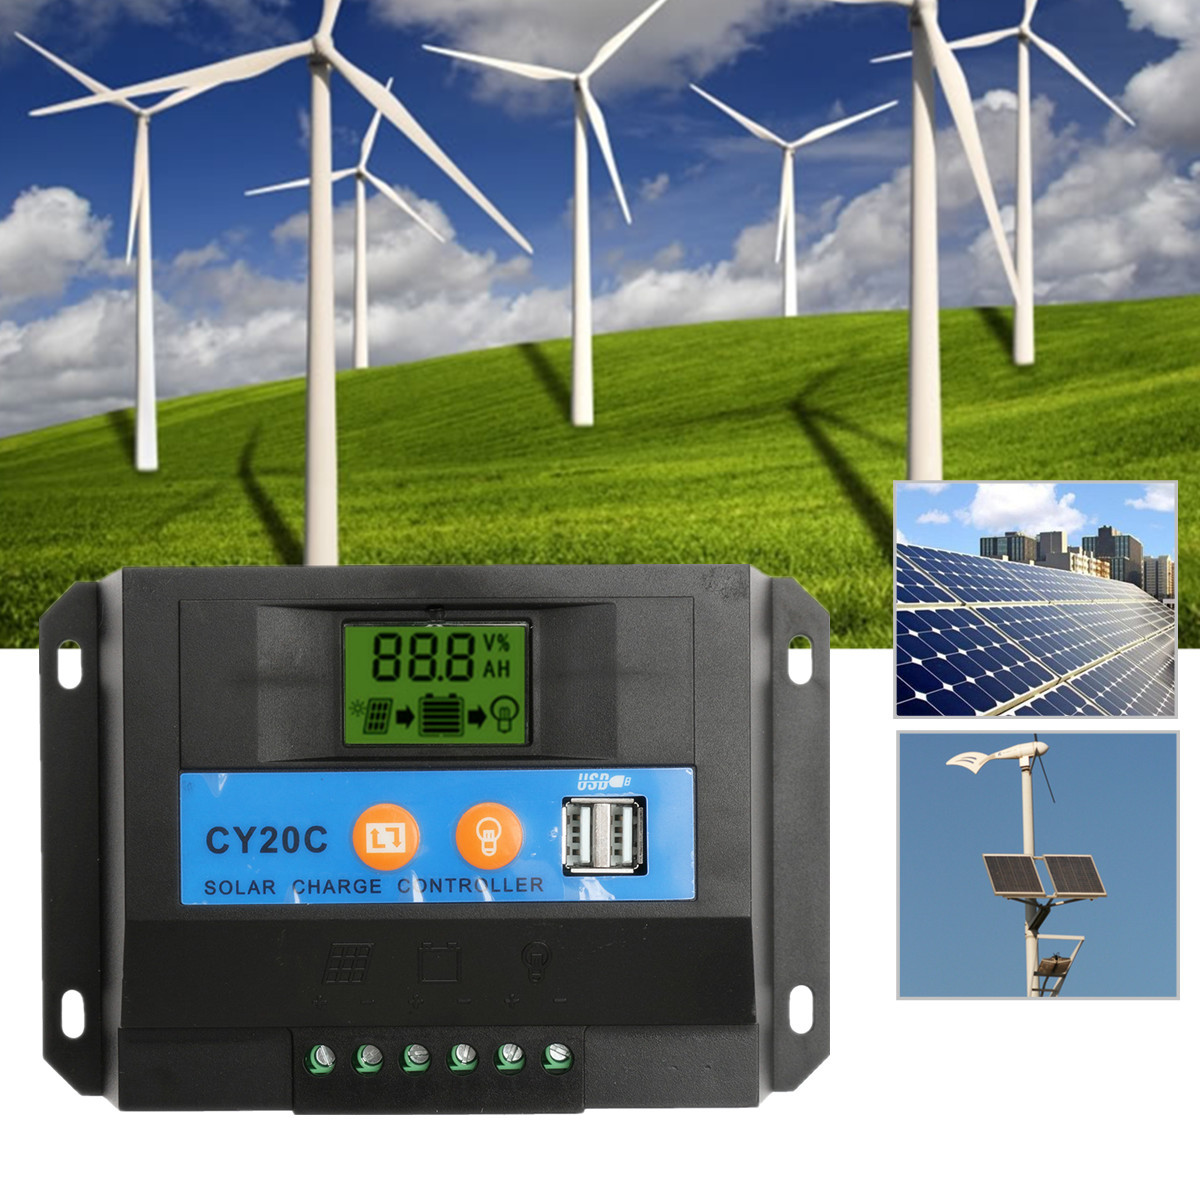 20A-12V24V-LCD-Solar-Charge-Controller-Panel-Battery-Regulator-With-2-USB-Ports-1085793-1